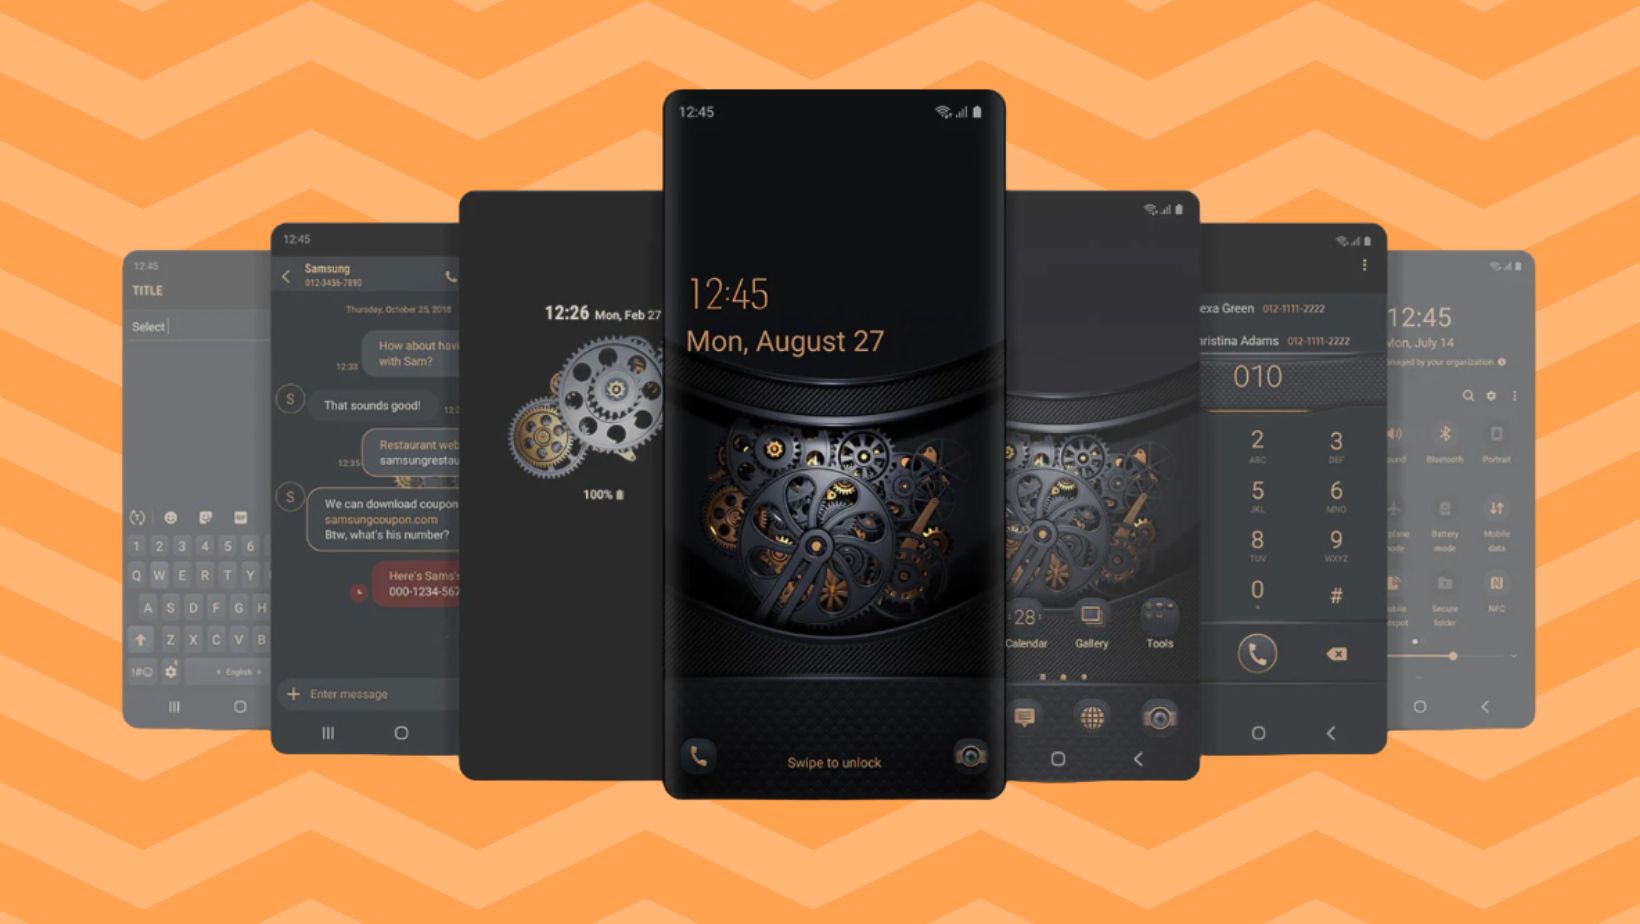 Top 10 Samsung Themes to Personalize Your Device